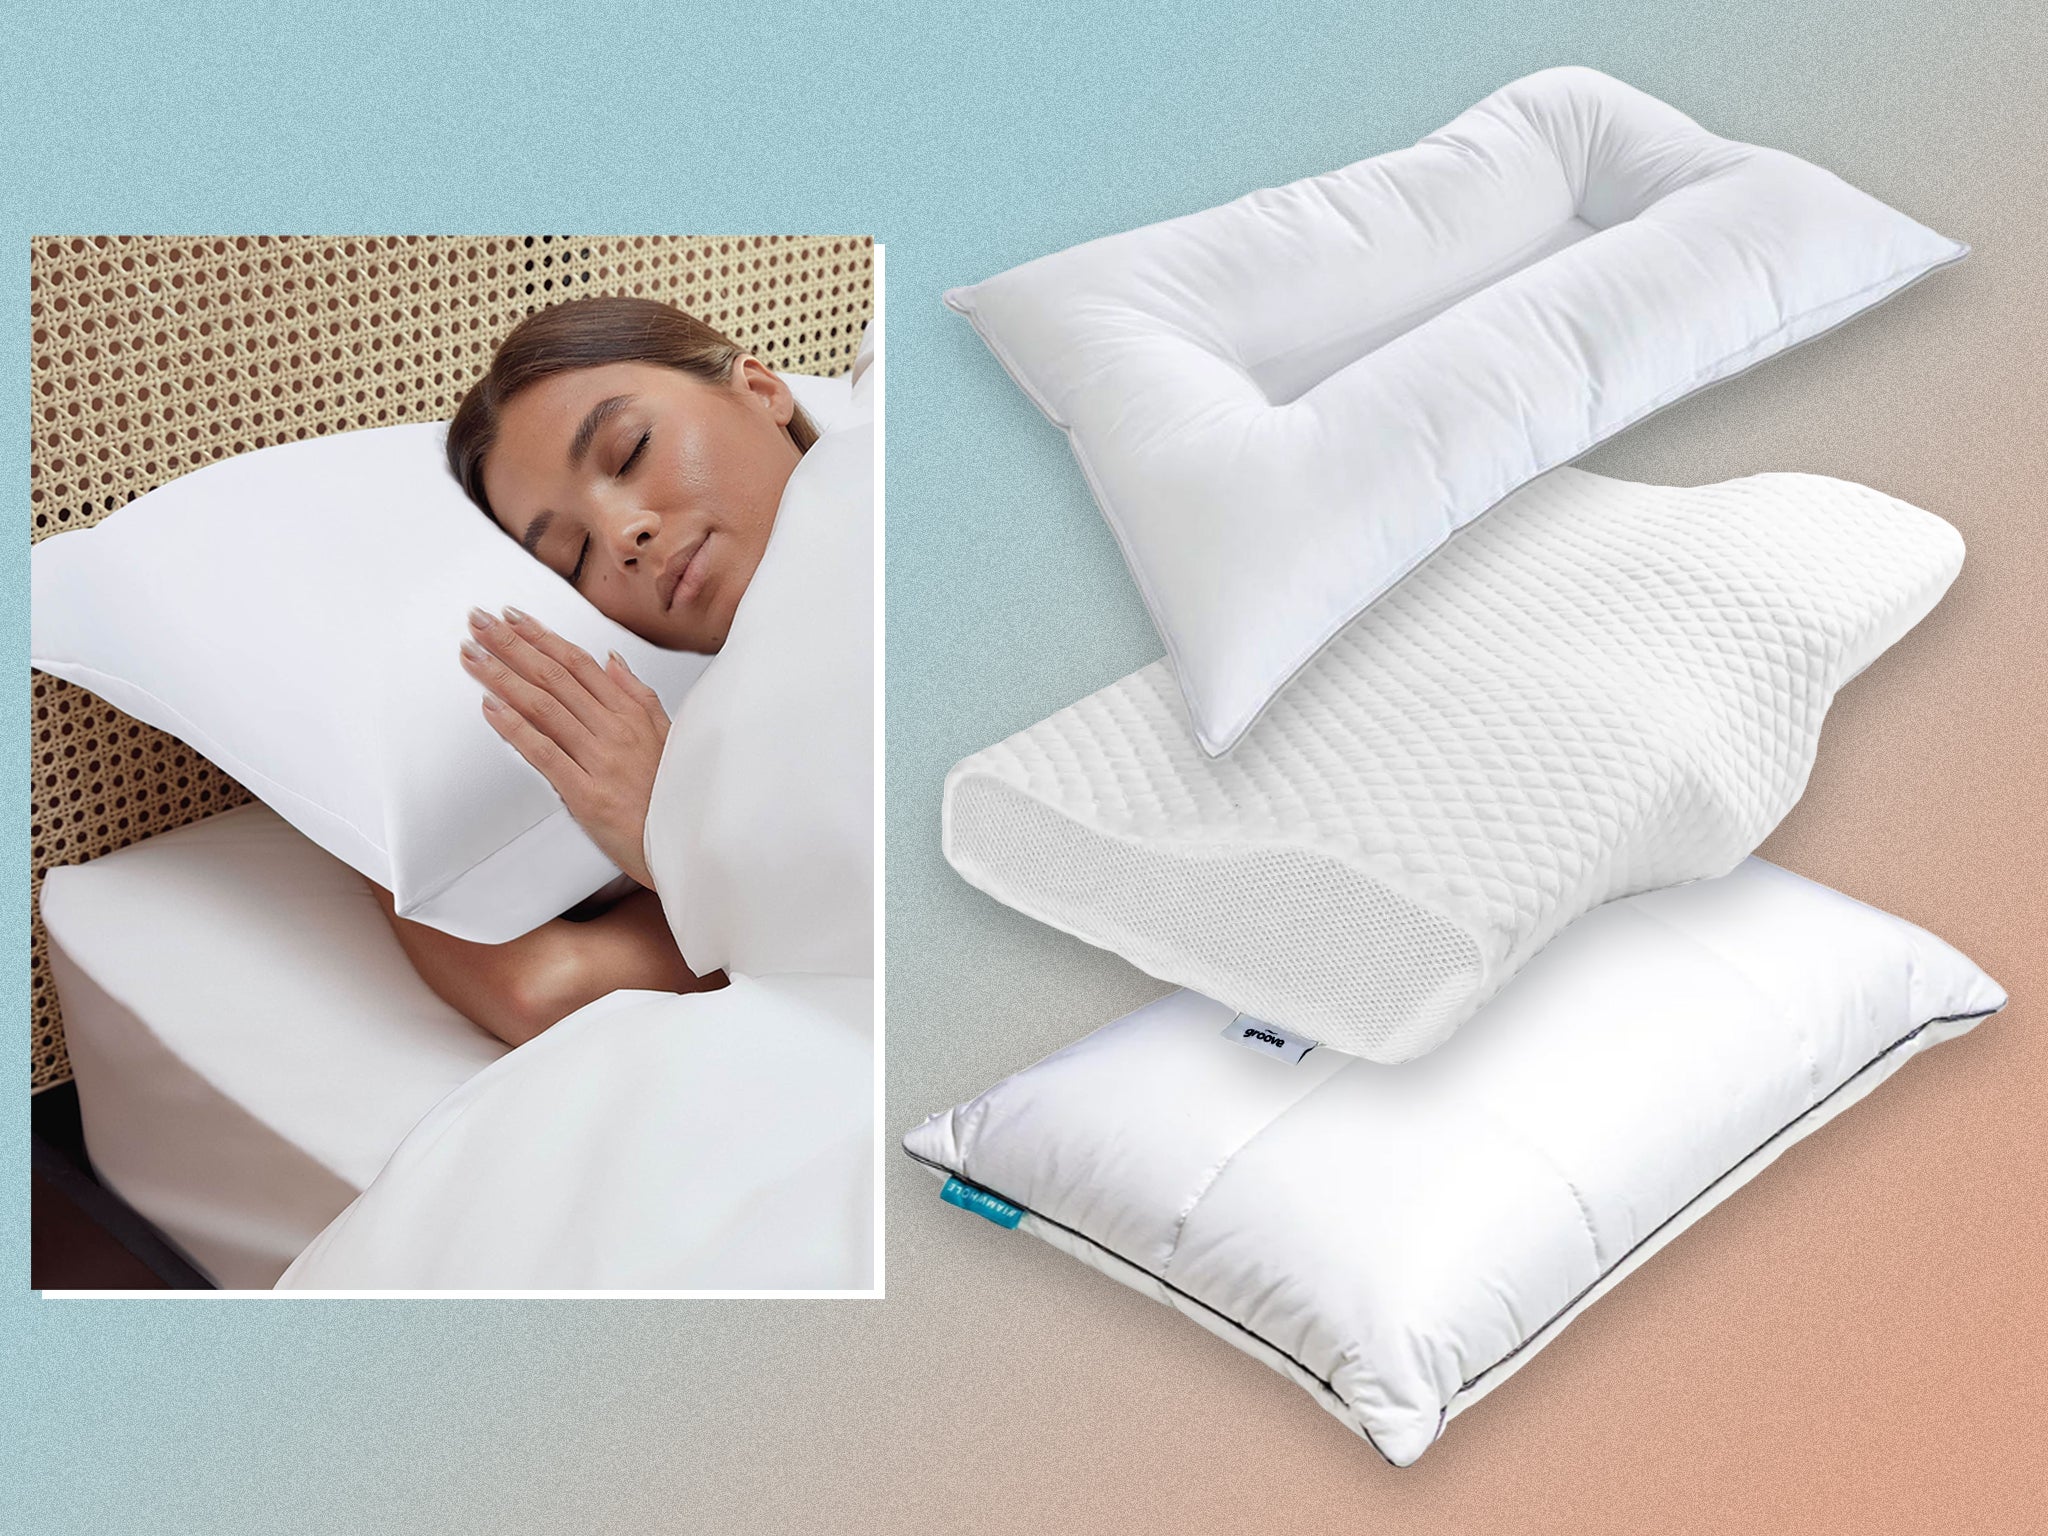 https://static.independent.co.uk/2023/05/04/15/anti%20snore%20pillows%20indybest.jpg